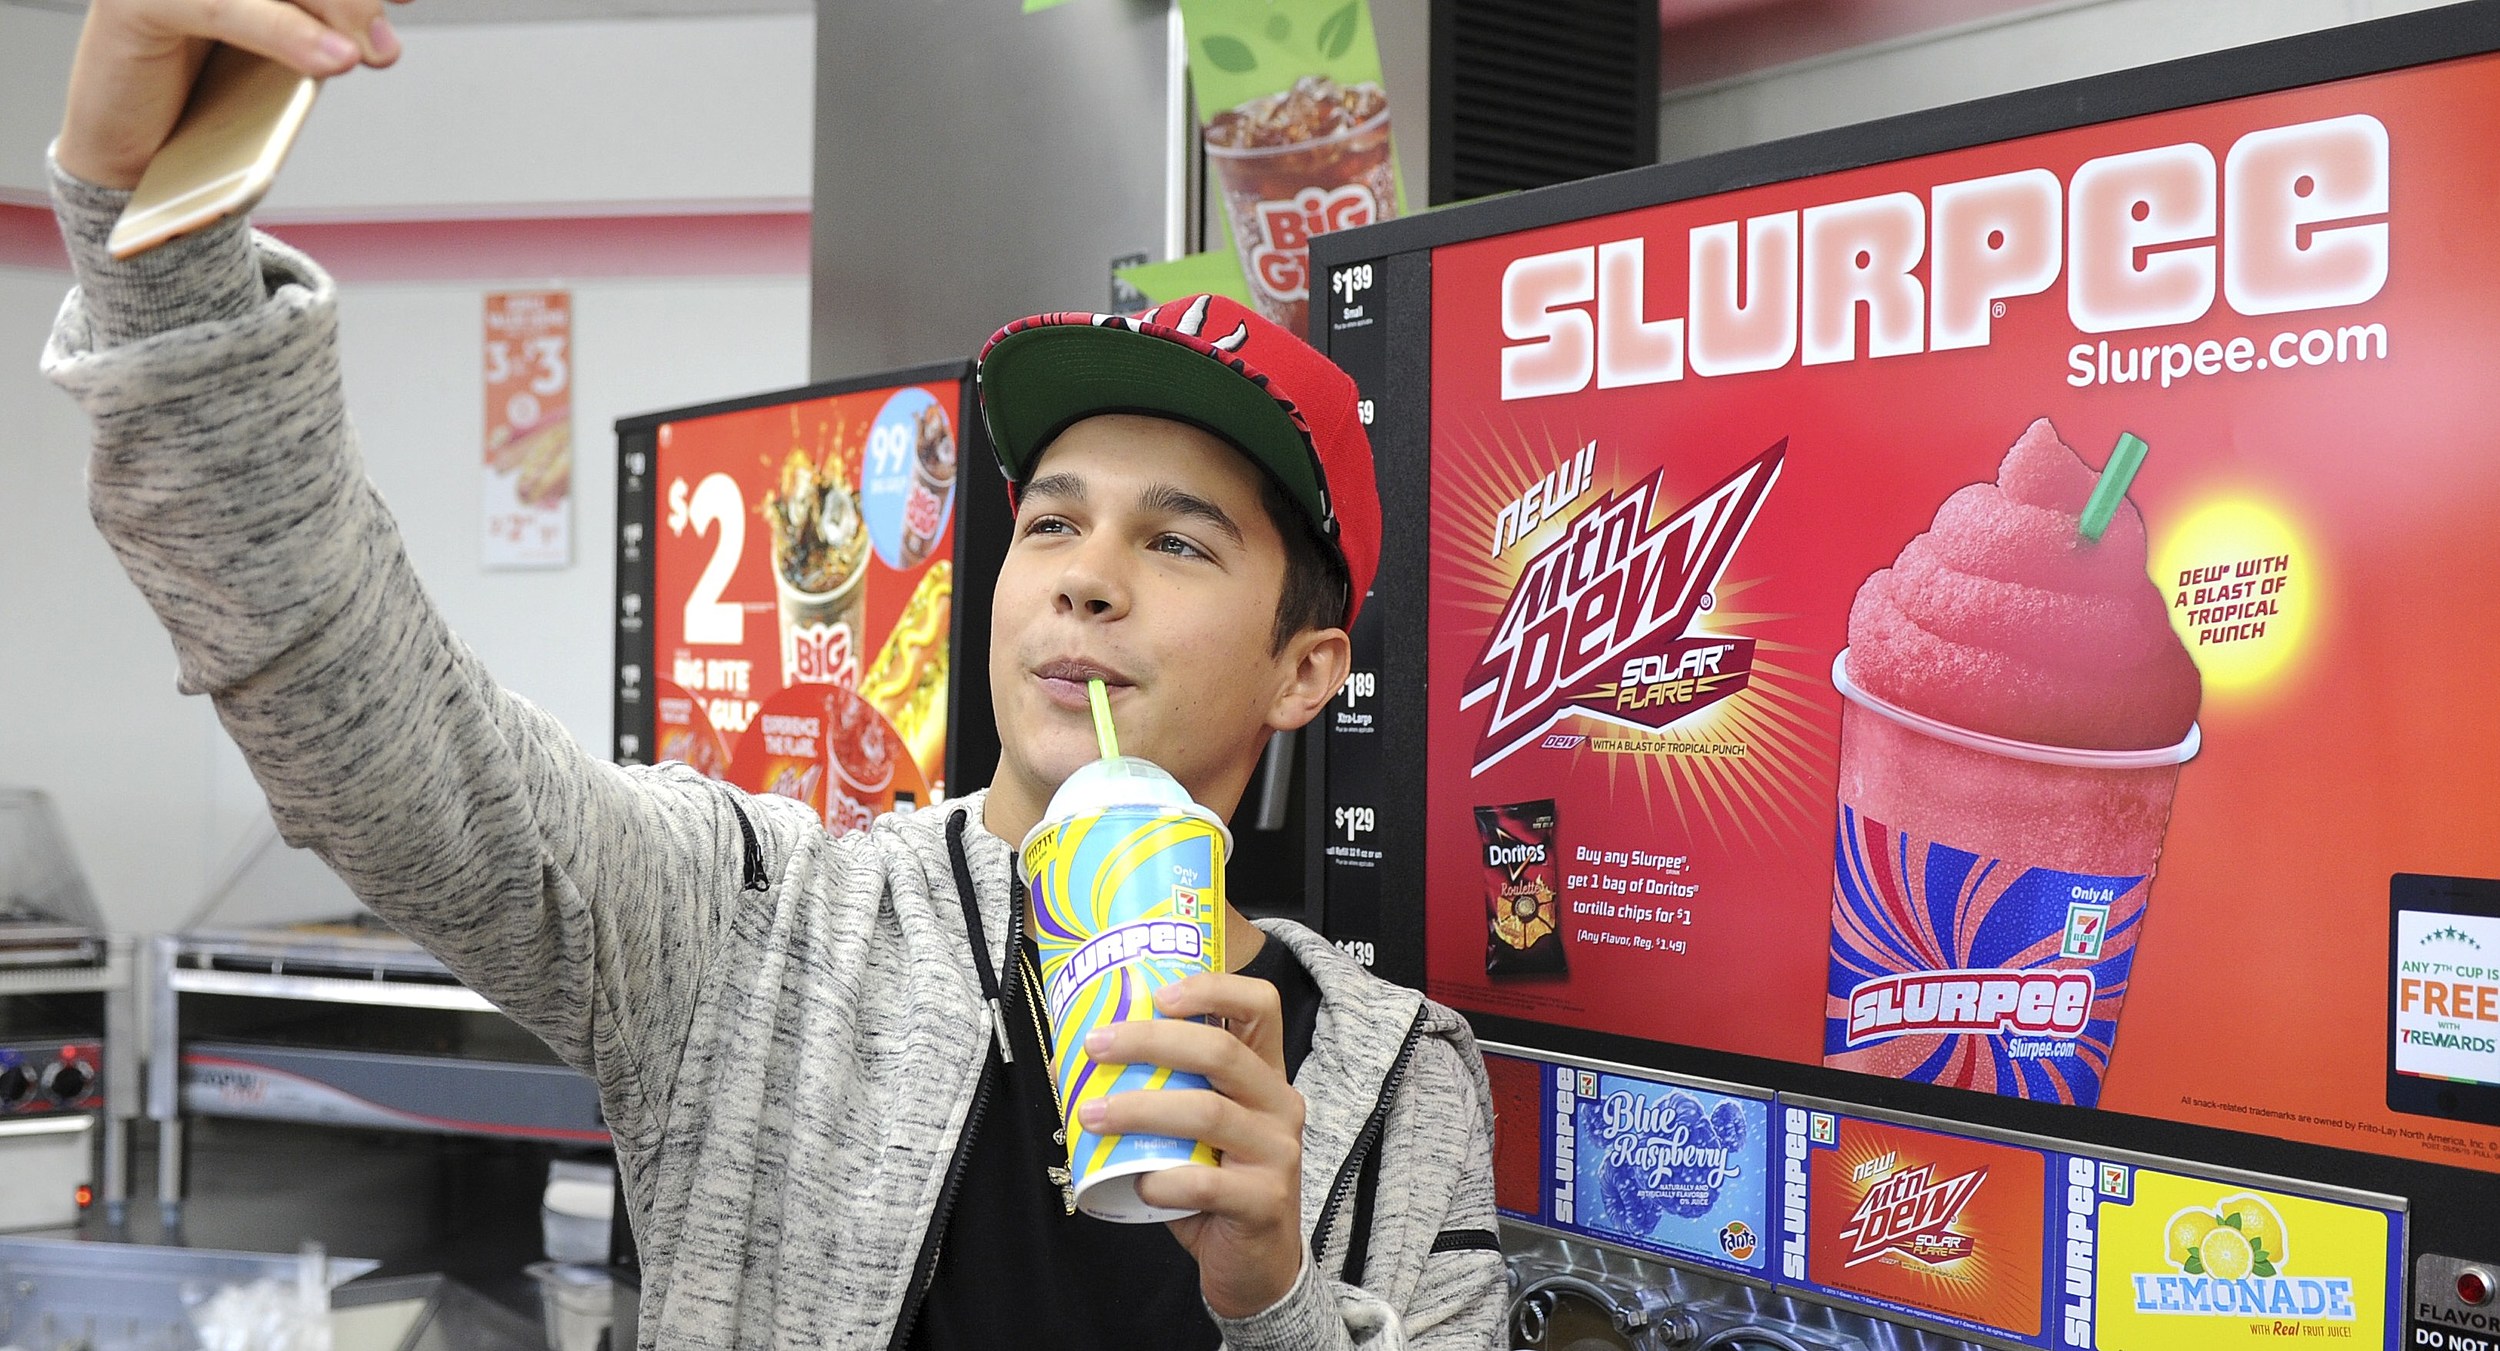 7-Eleven is giving the Slurpee a makeover